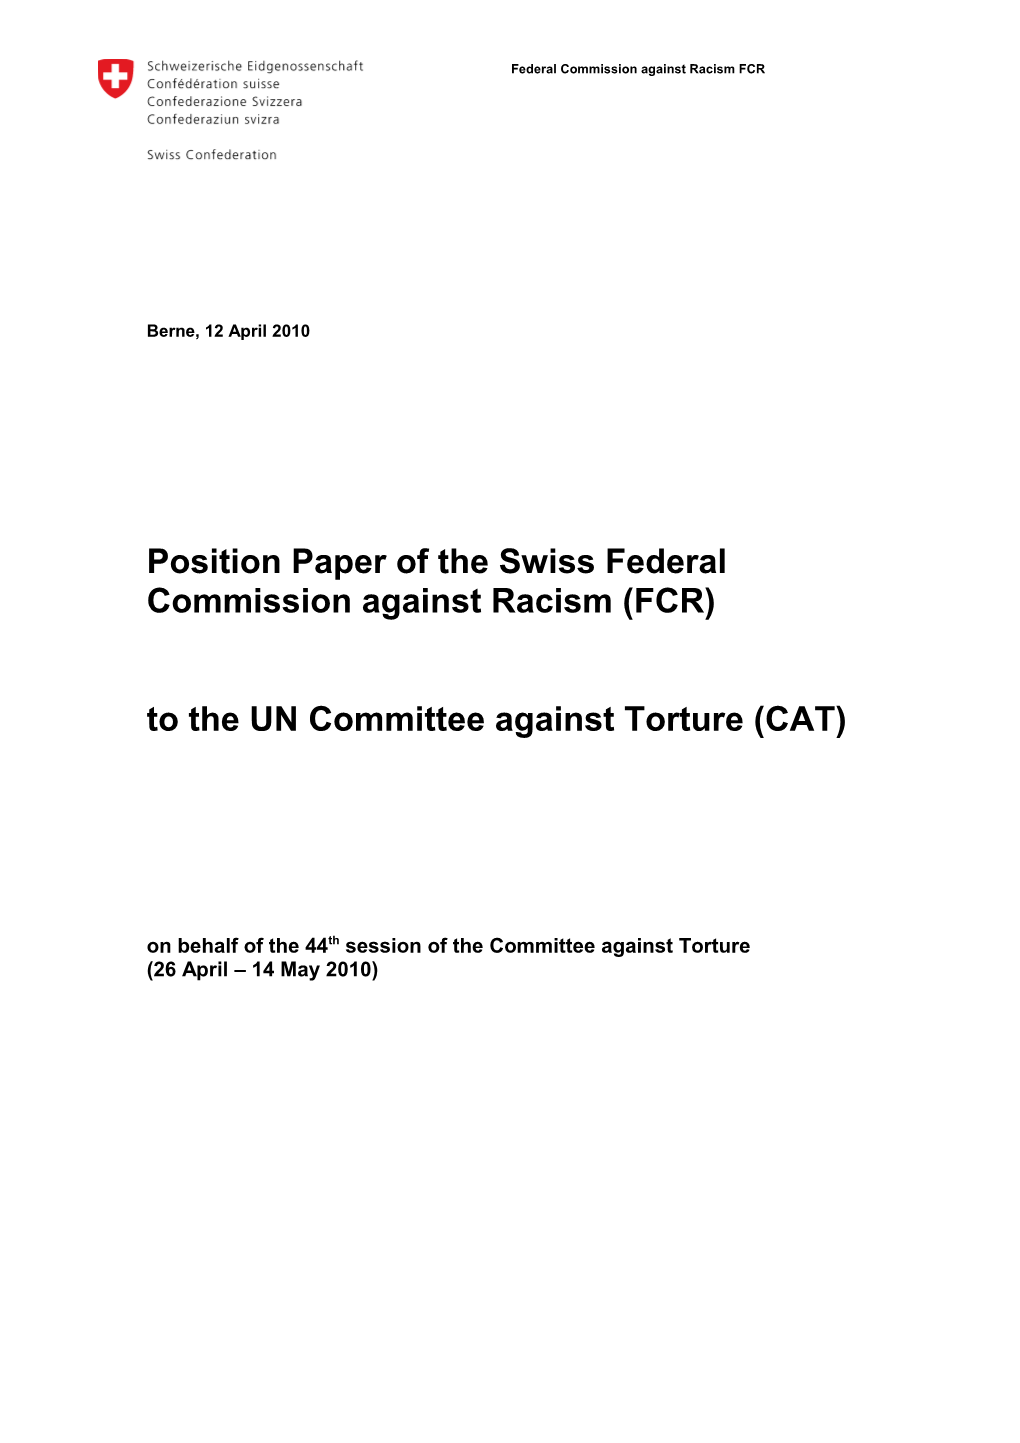 To the UN Committee Against Torture (CAT)